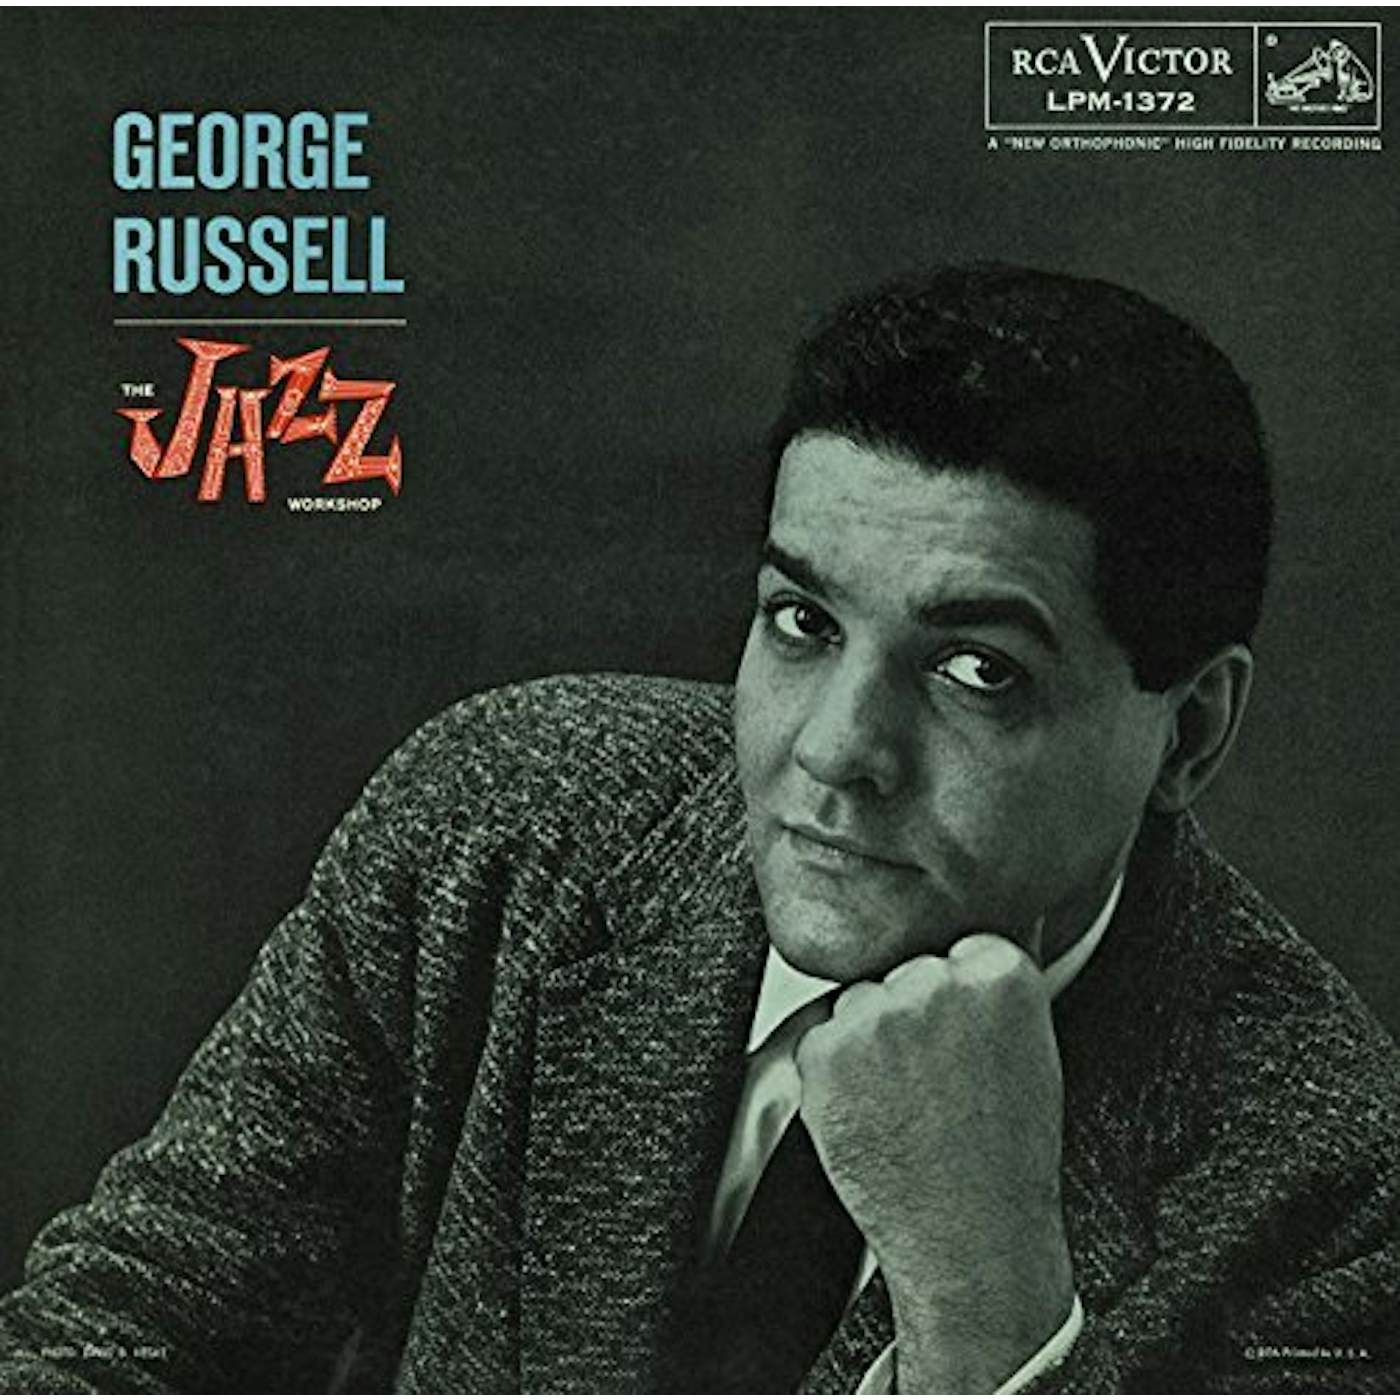 George Russell RCA/VICTOR WORKSHOP CD